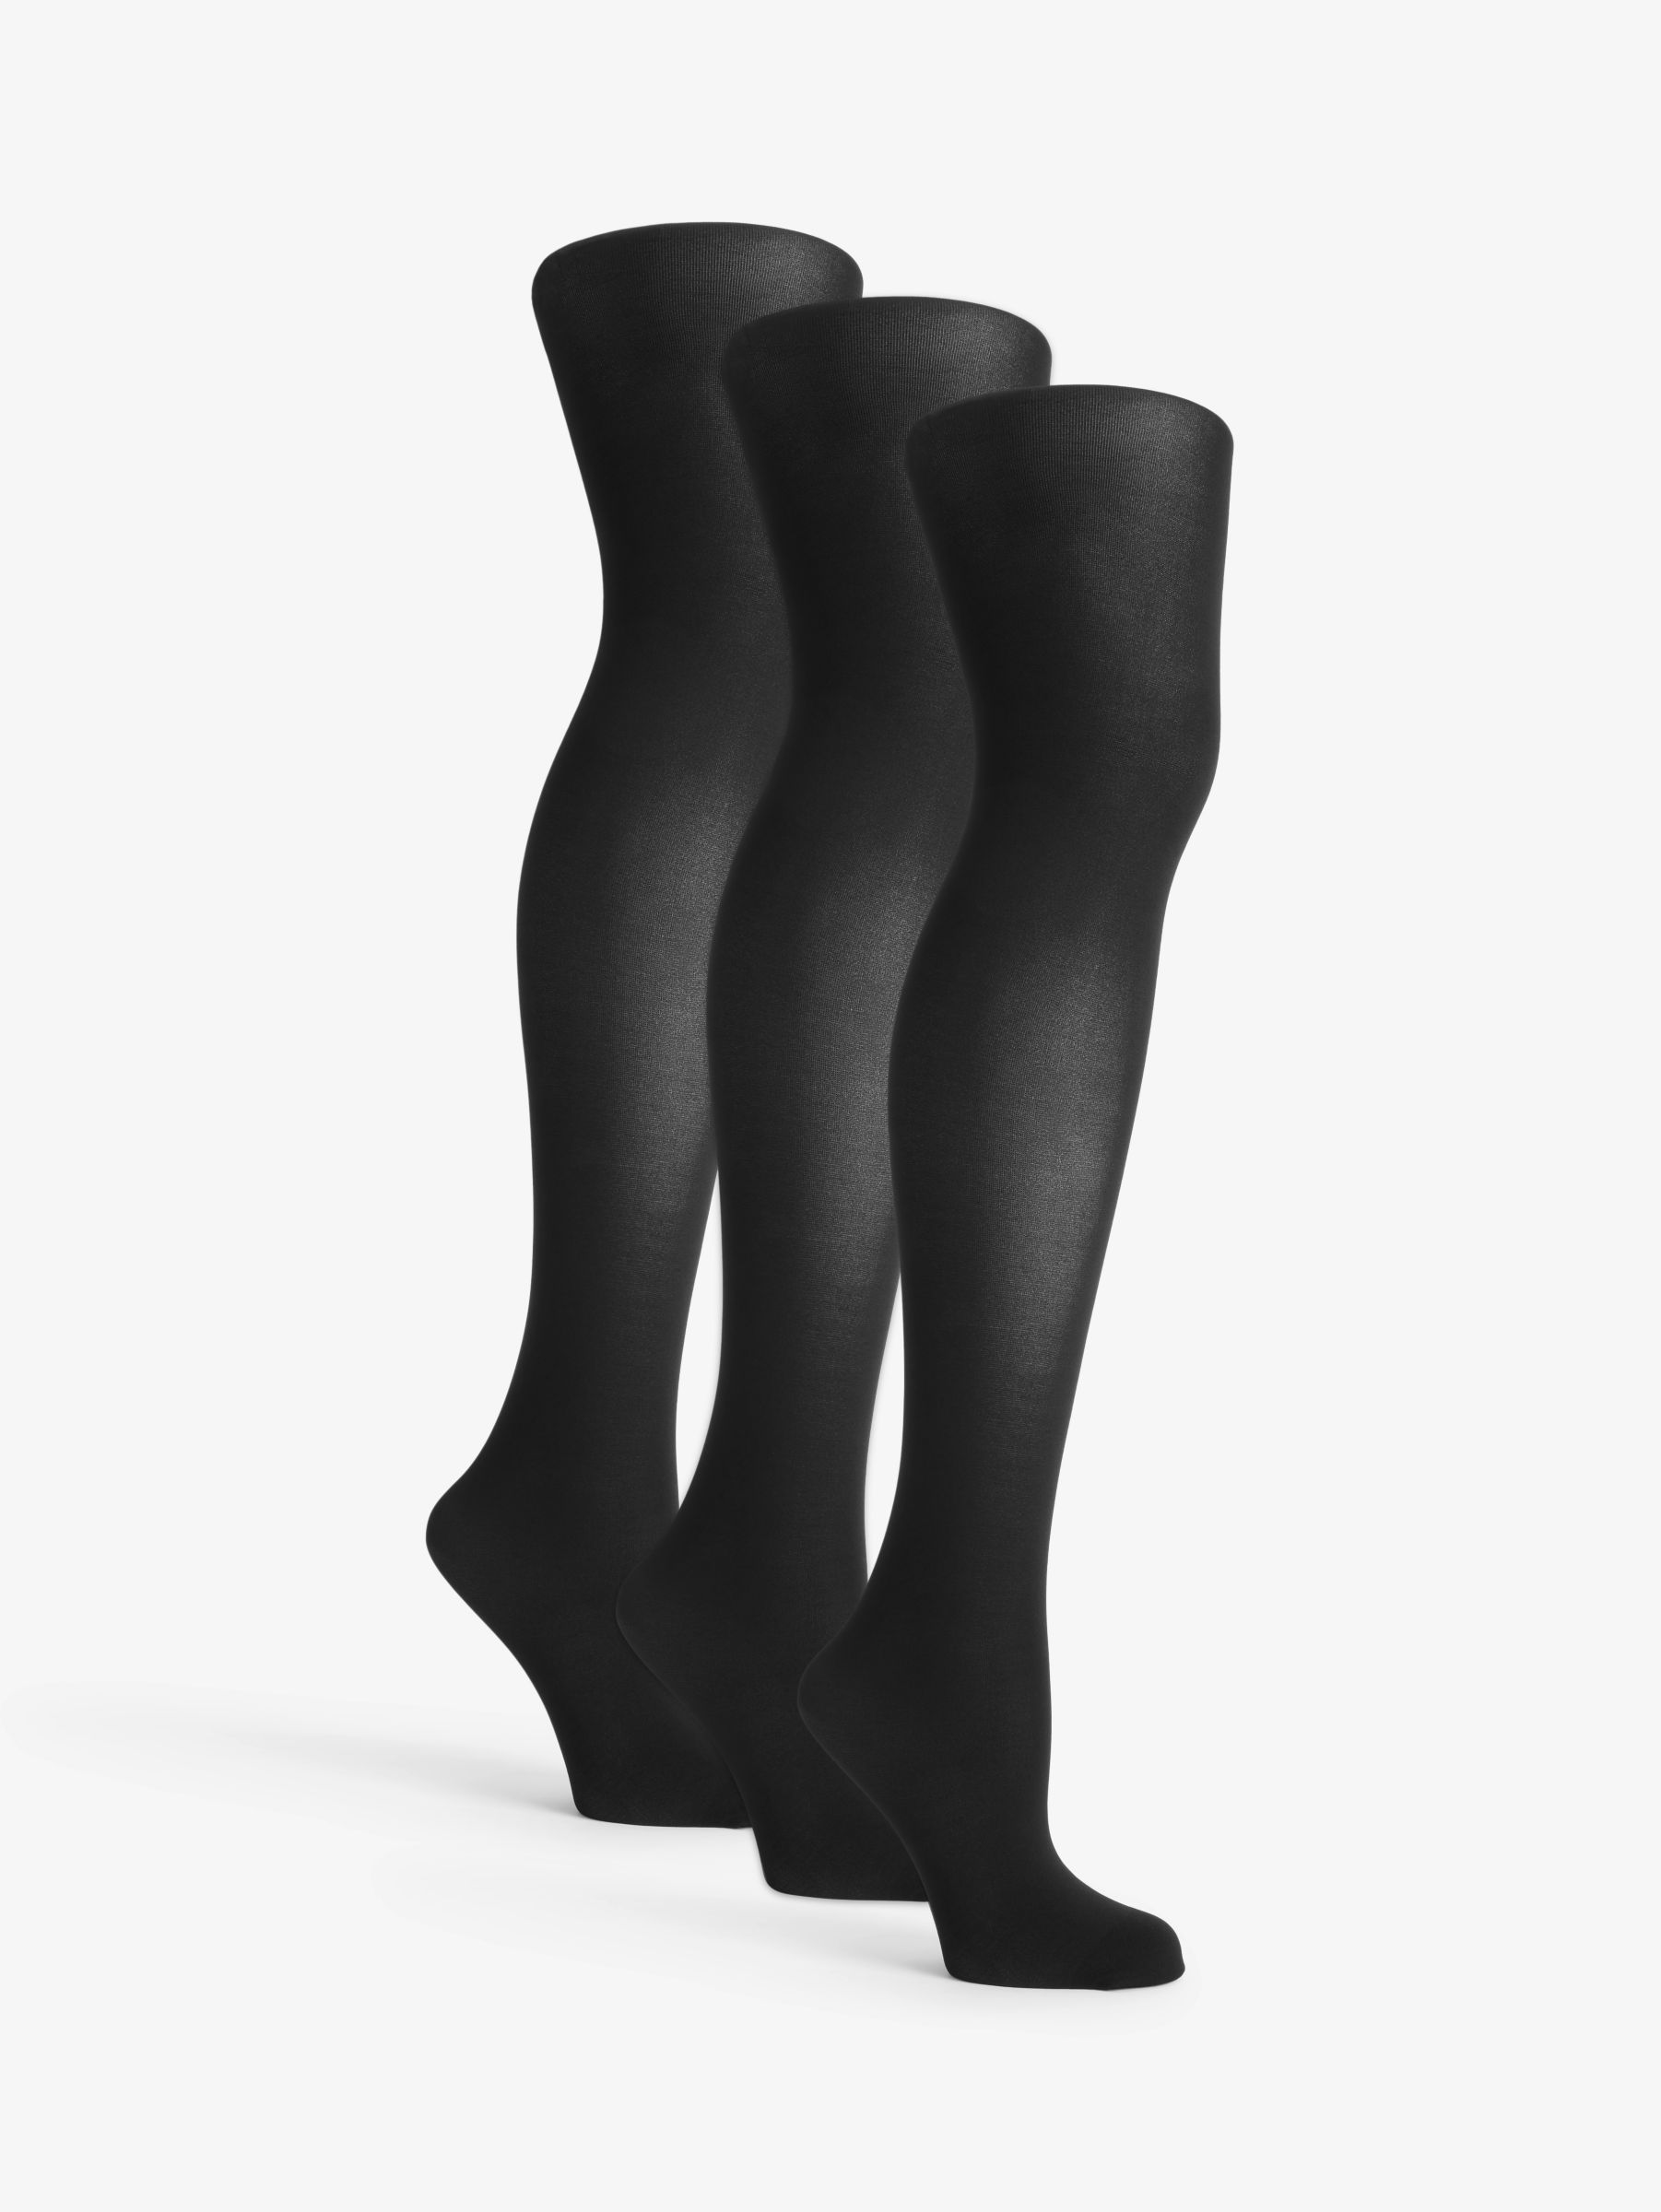 Tights, Women's Tights